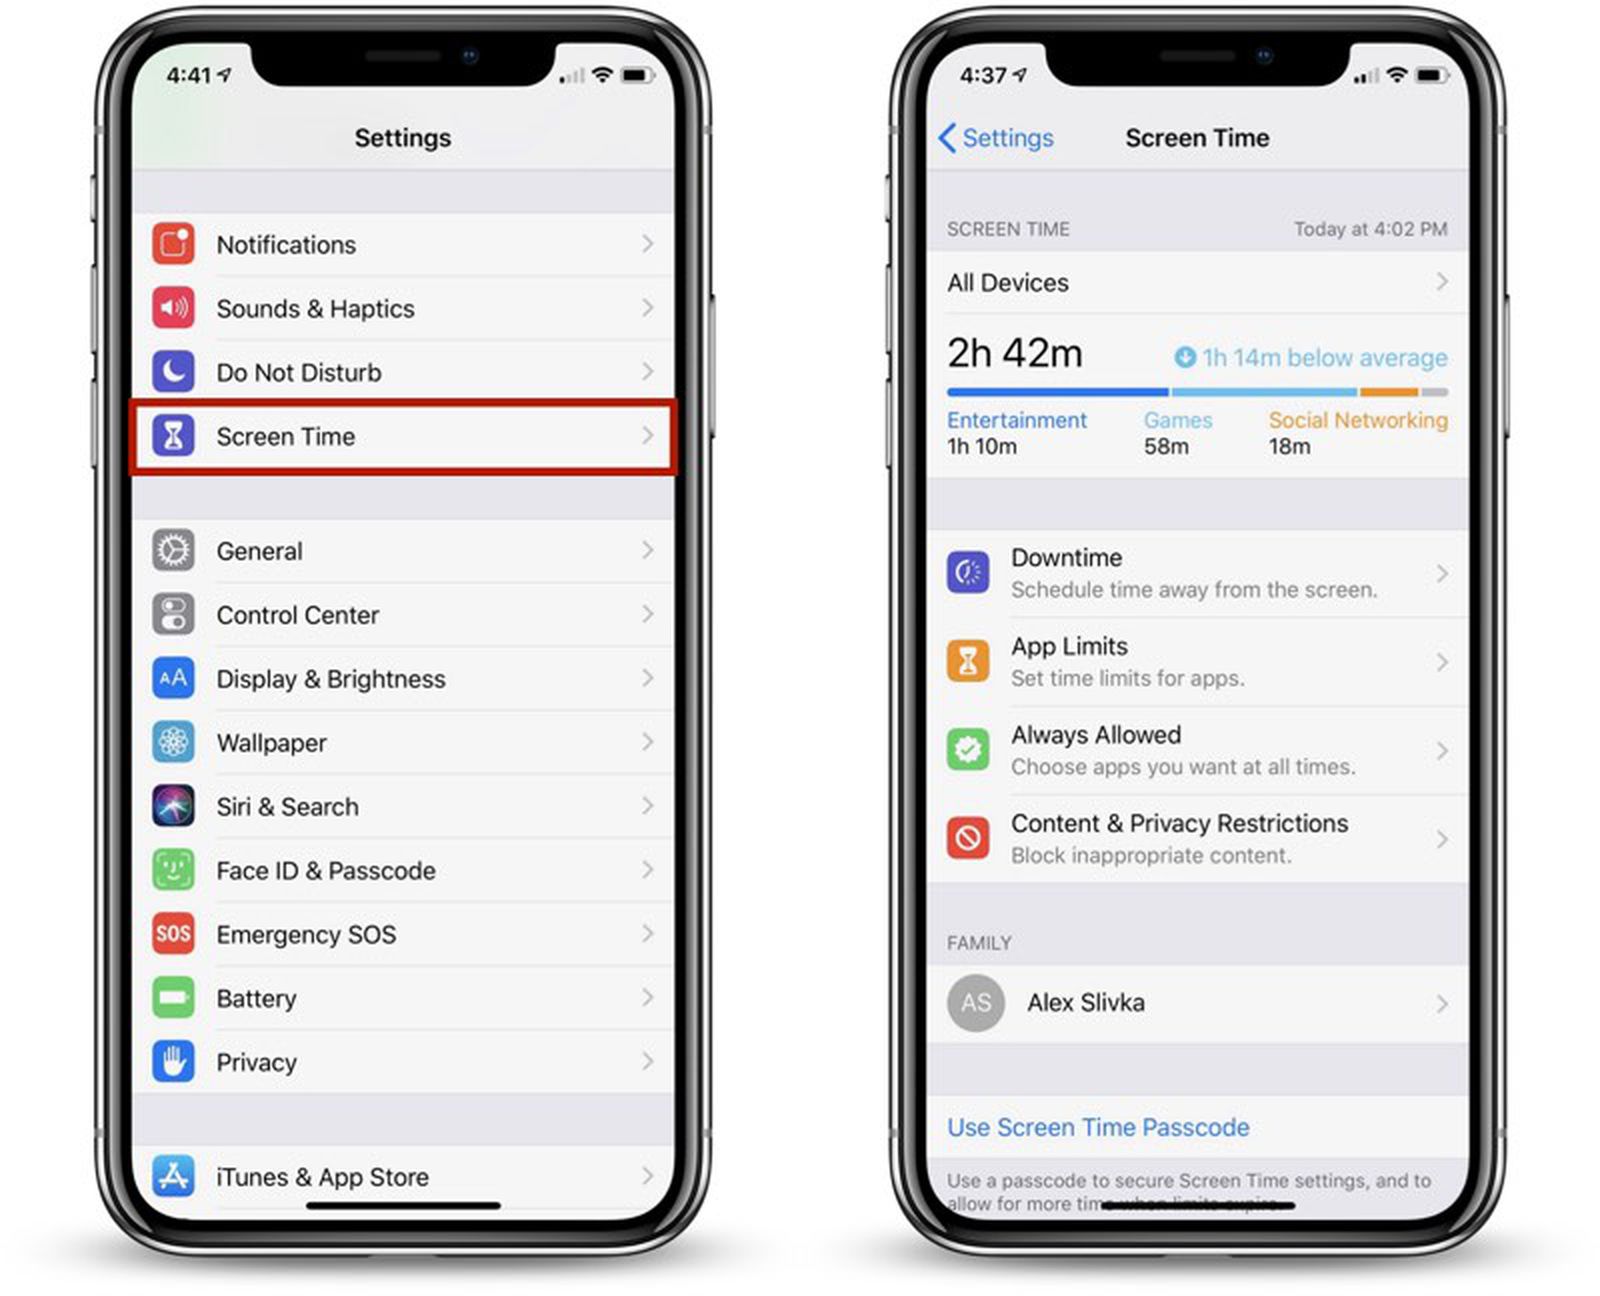 How to Use Screen Time in iOS 12 - MacRumors